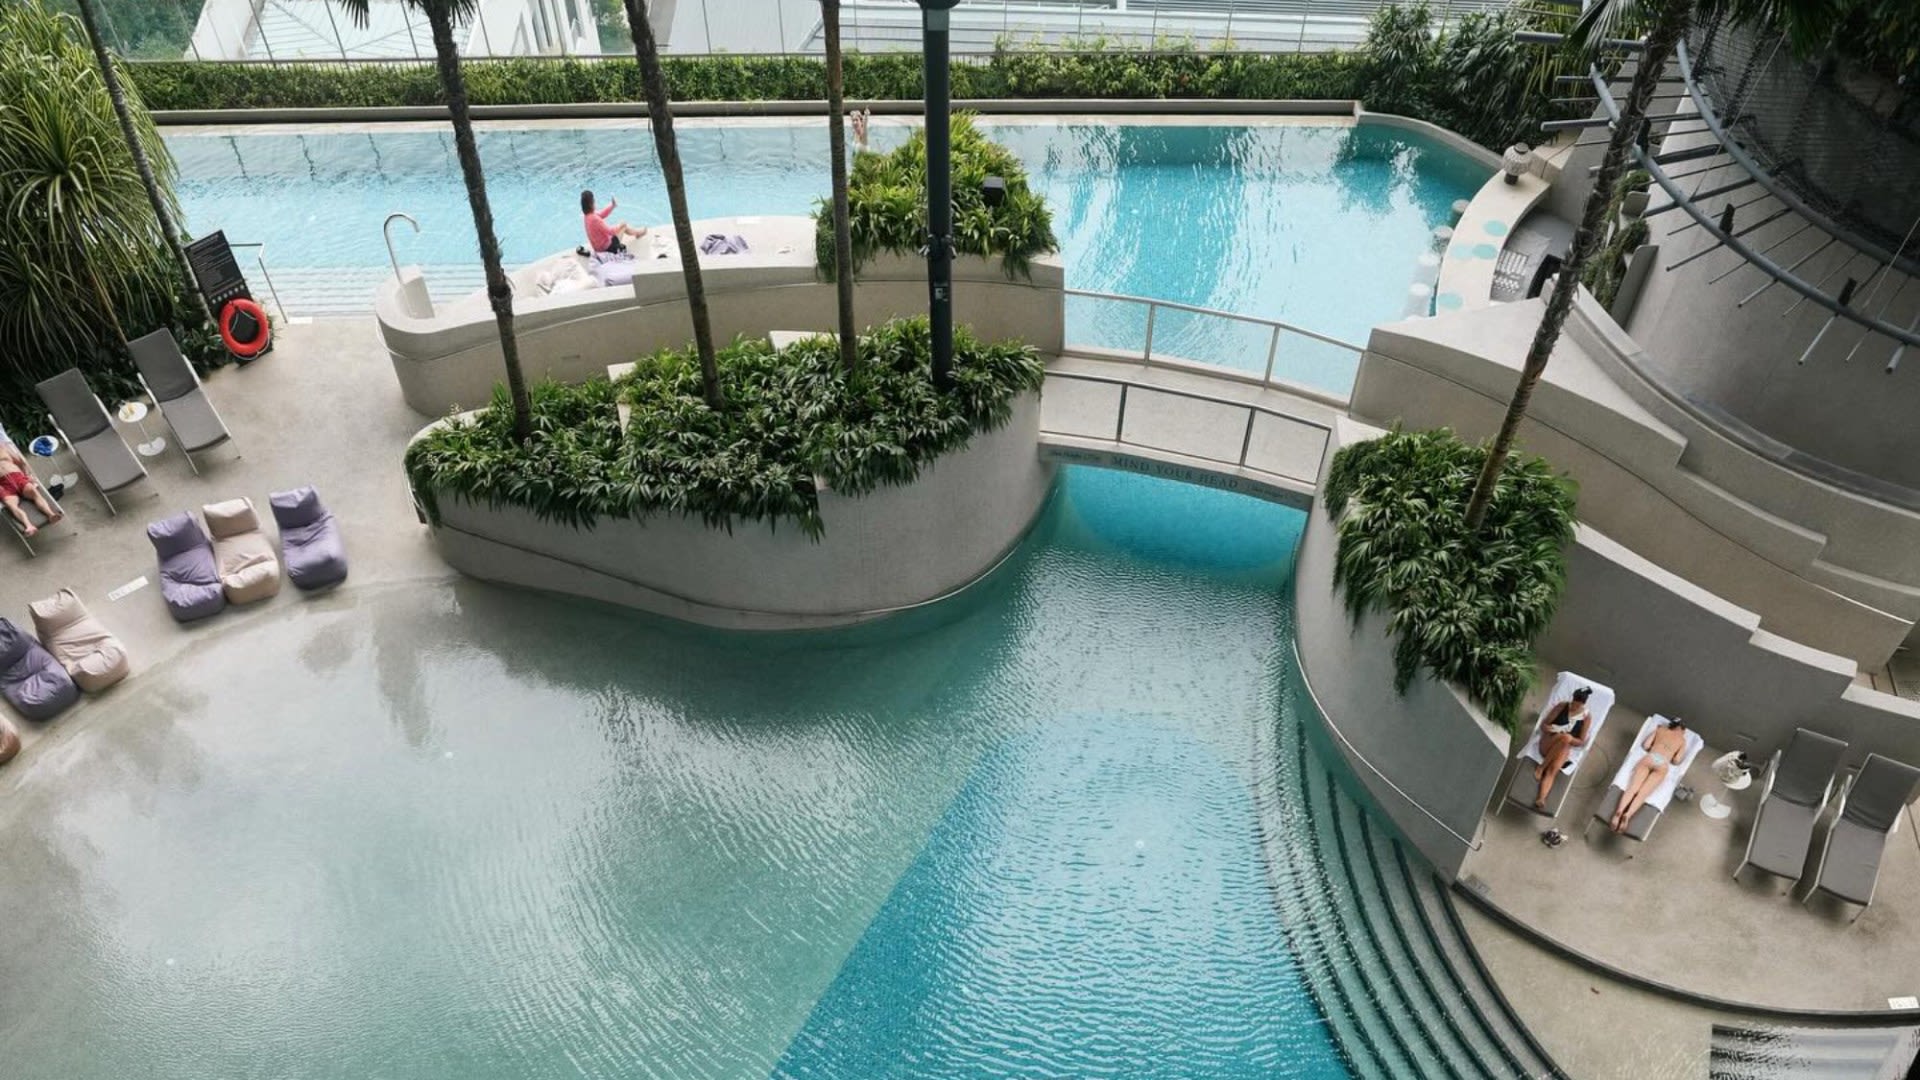 Inside Singapore's garden hotel that's half JUNGLE - with its own waterfall